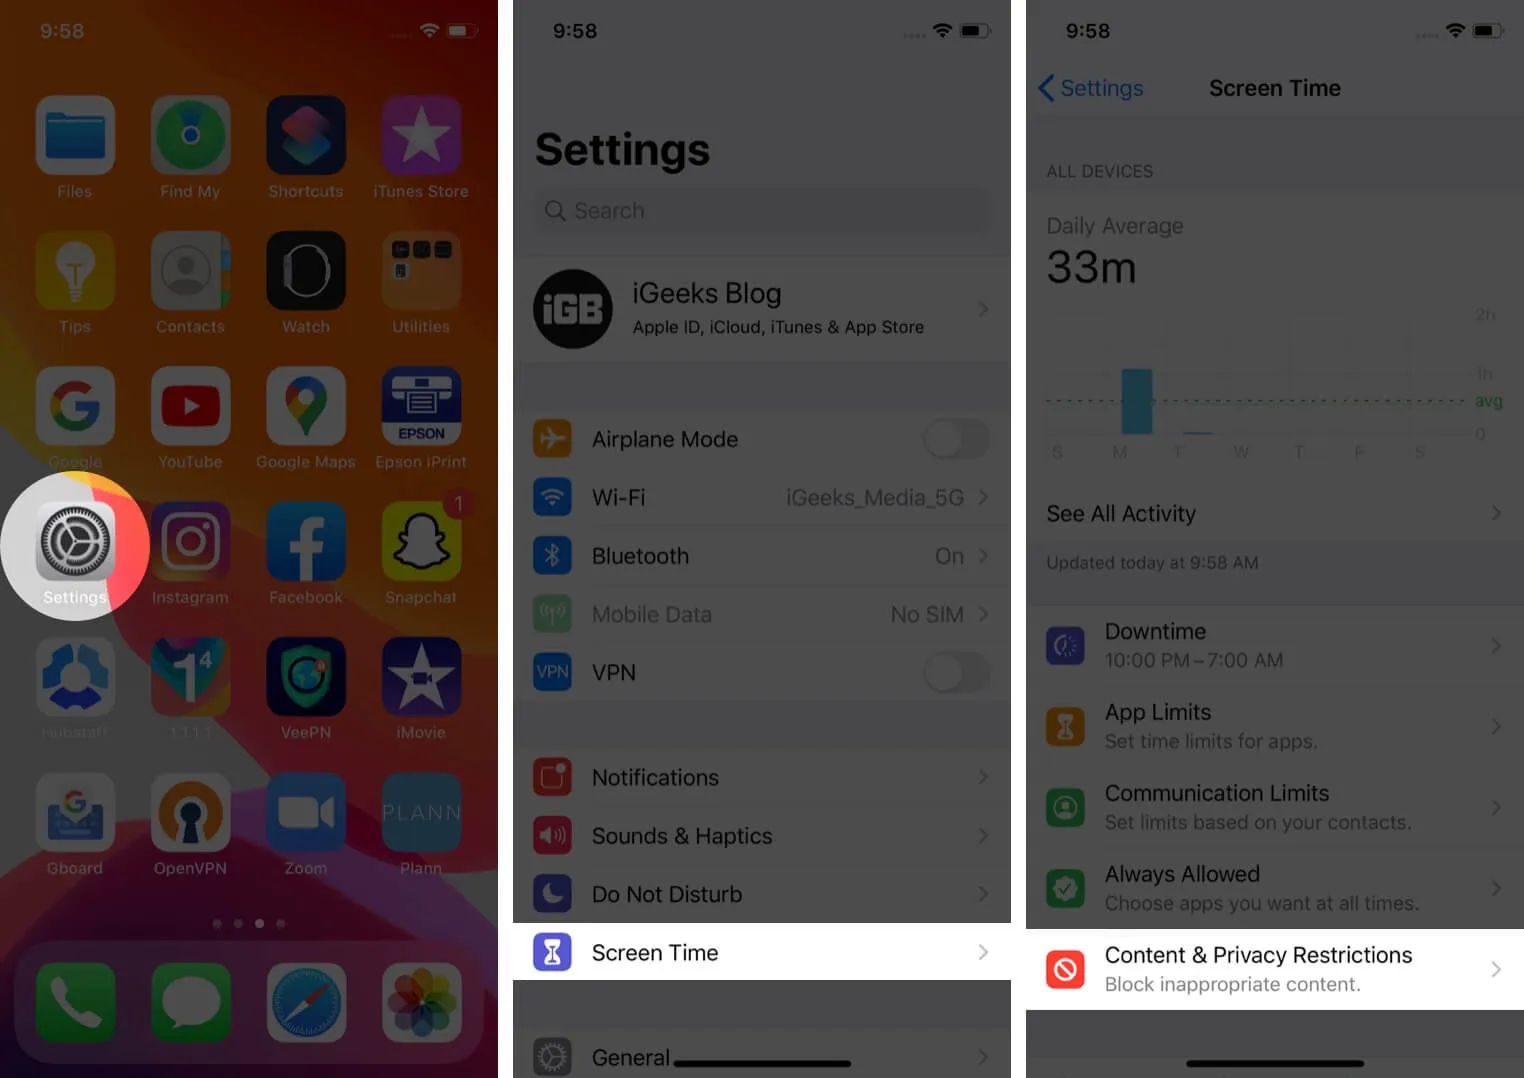 open settings tap on screen time and then tap on content & privacy restrictions on iphone